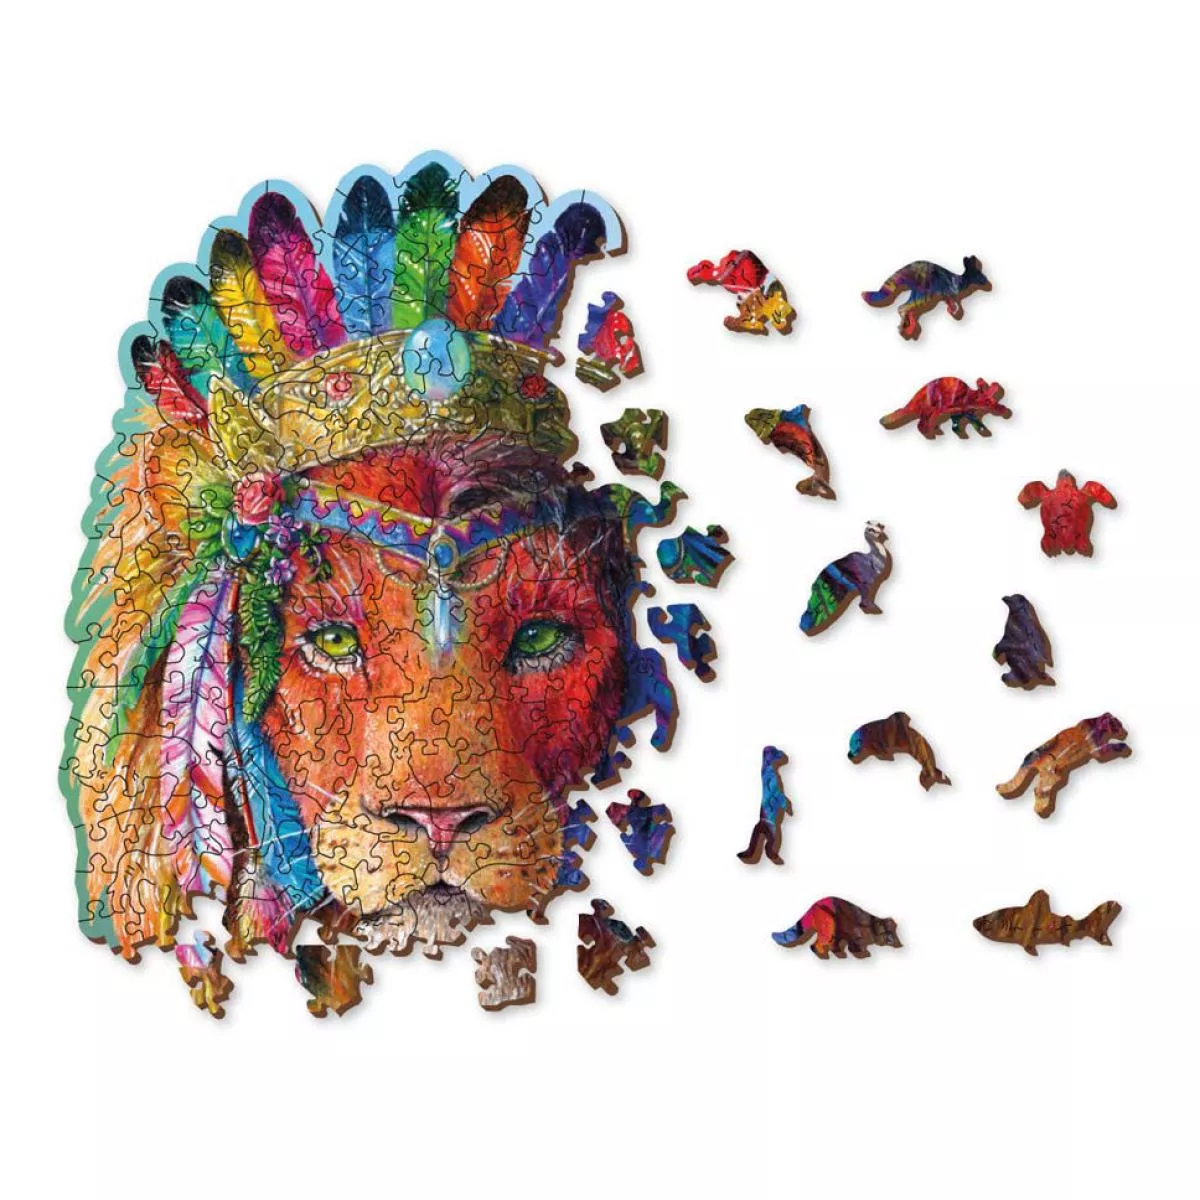 Farbenfrohes Holz-Puzzle "Mystic Lion" – 505 Teile in 80 Formen